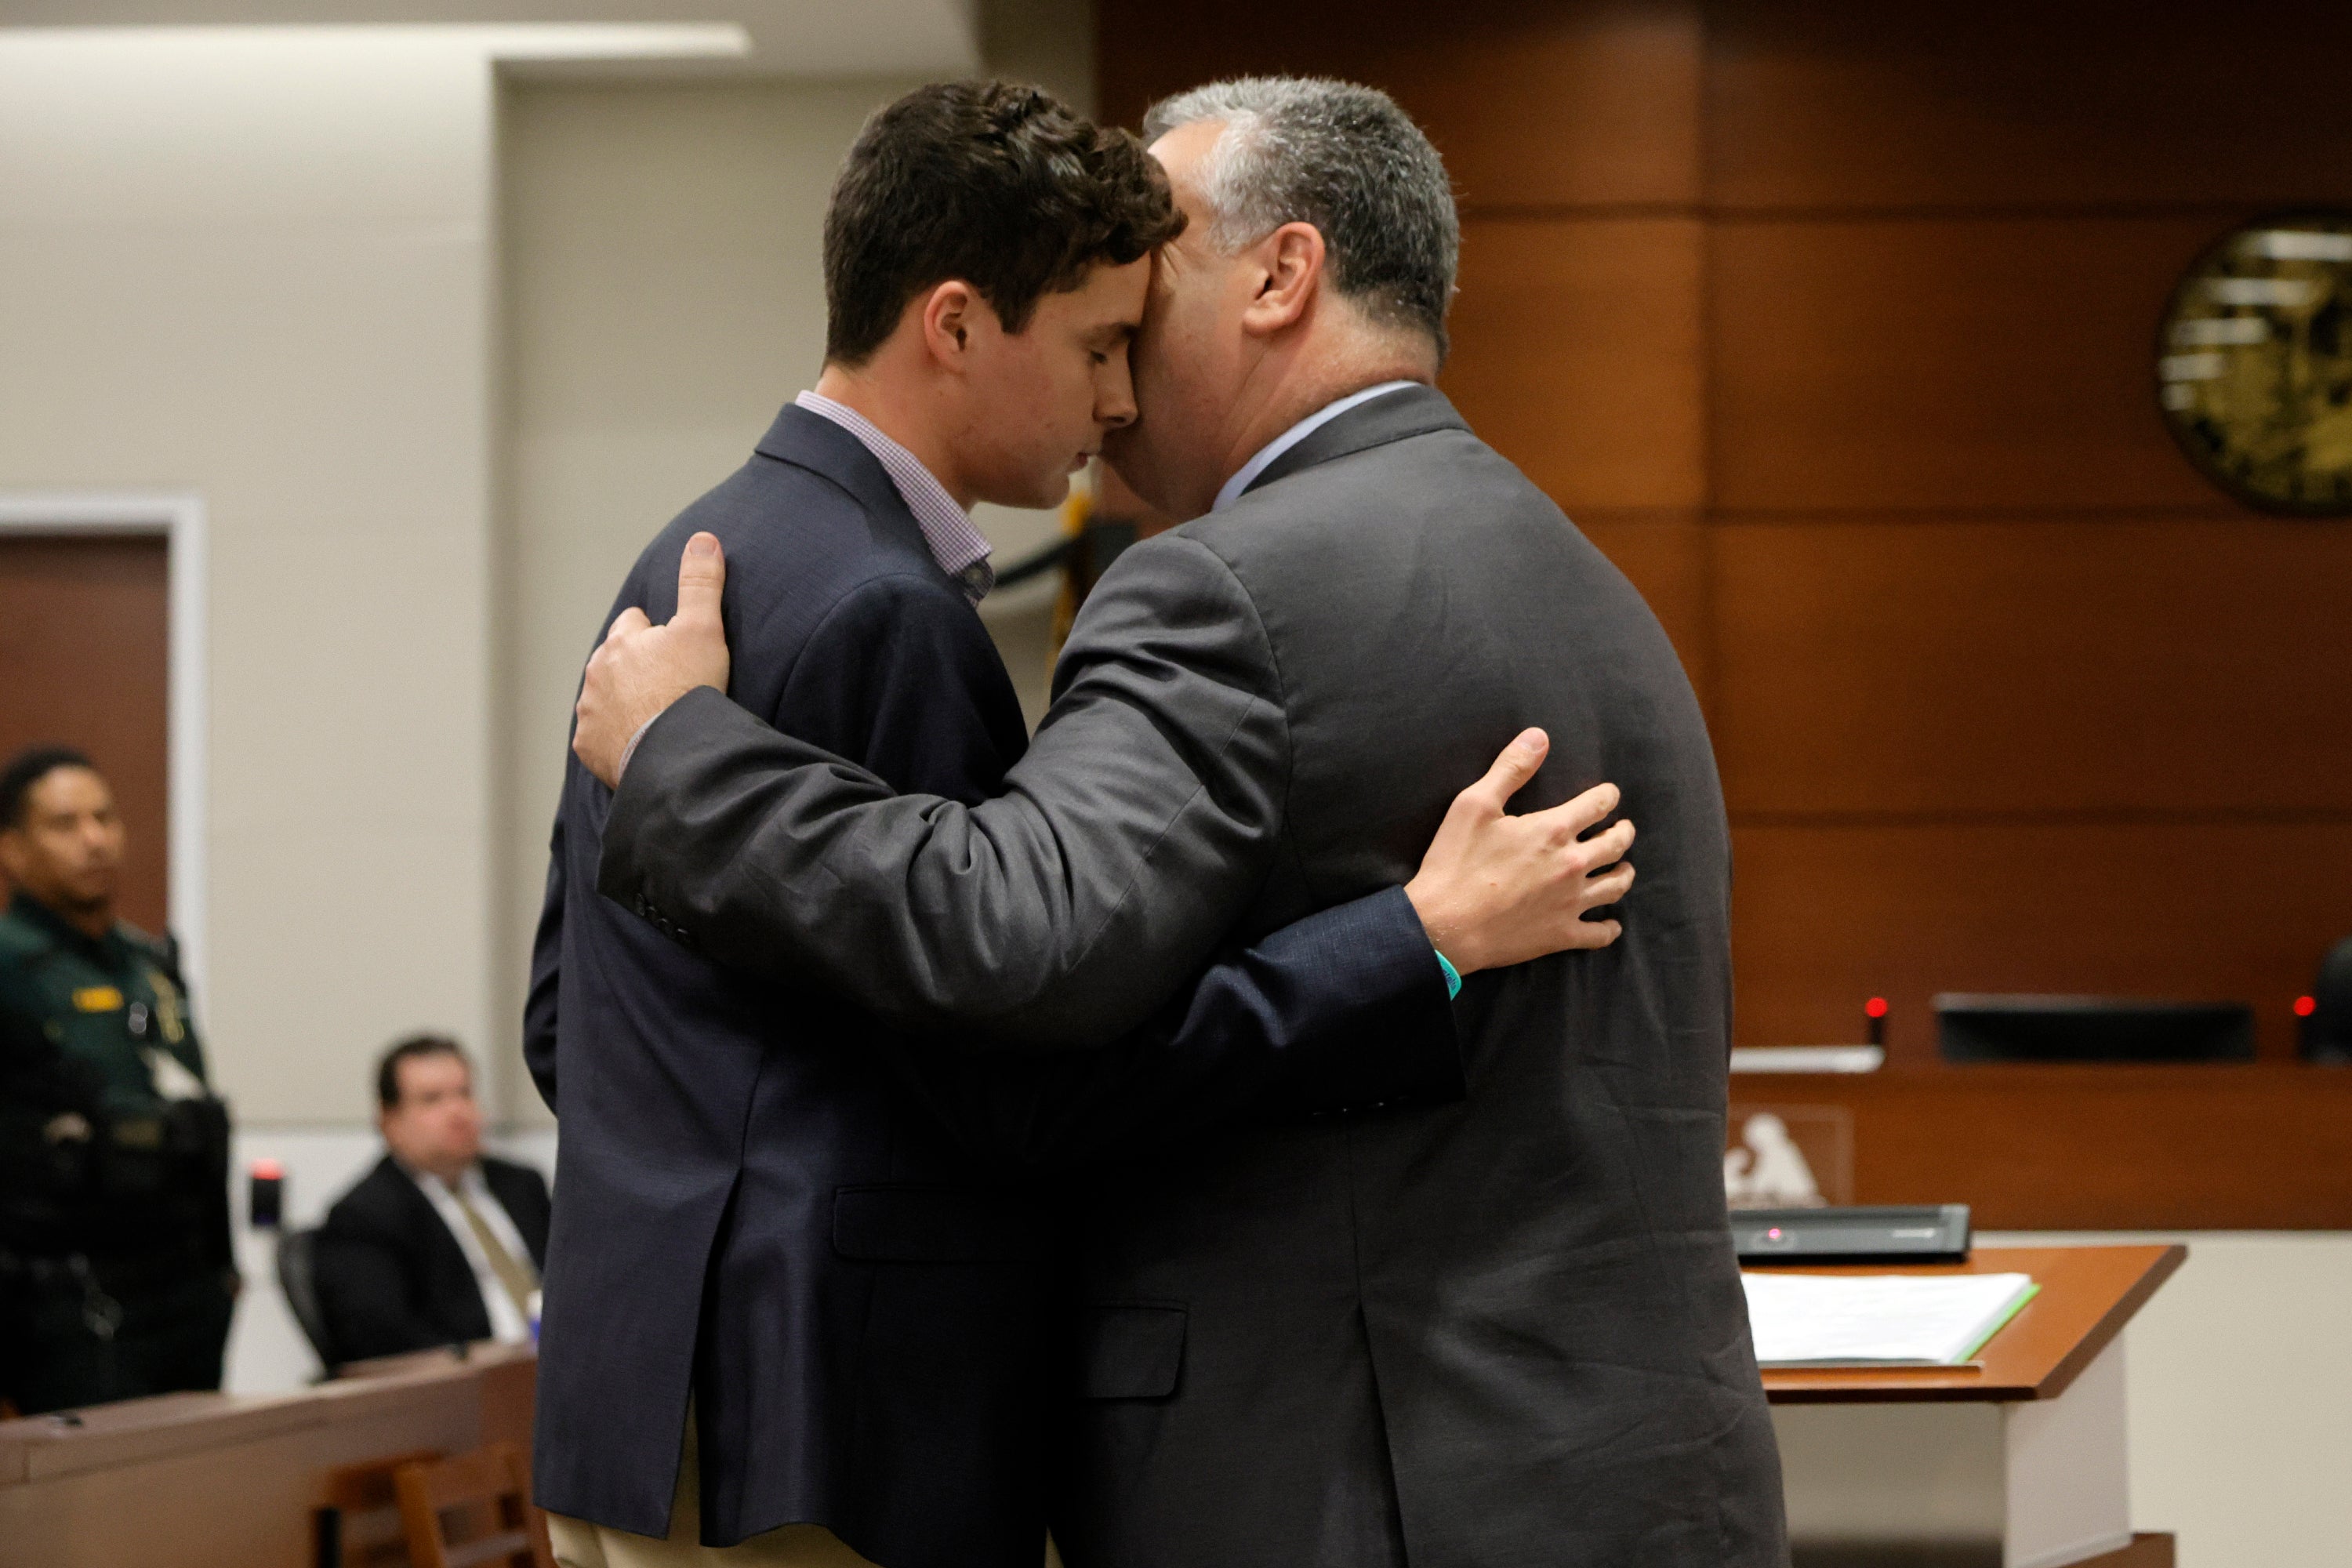 Tony Montalto embraces his son Anthony, after Anthony gave his victim impact statement about the murder of his sister Gina